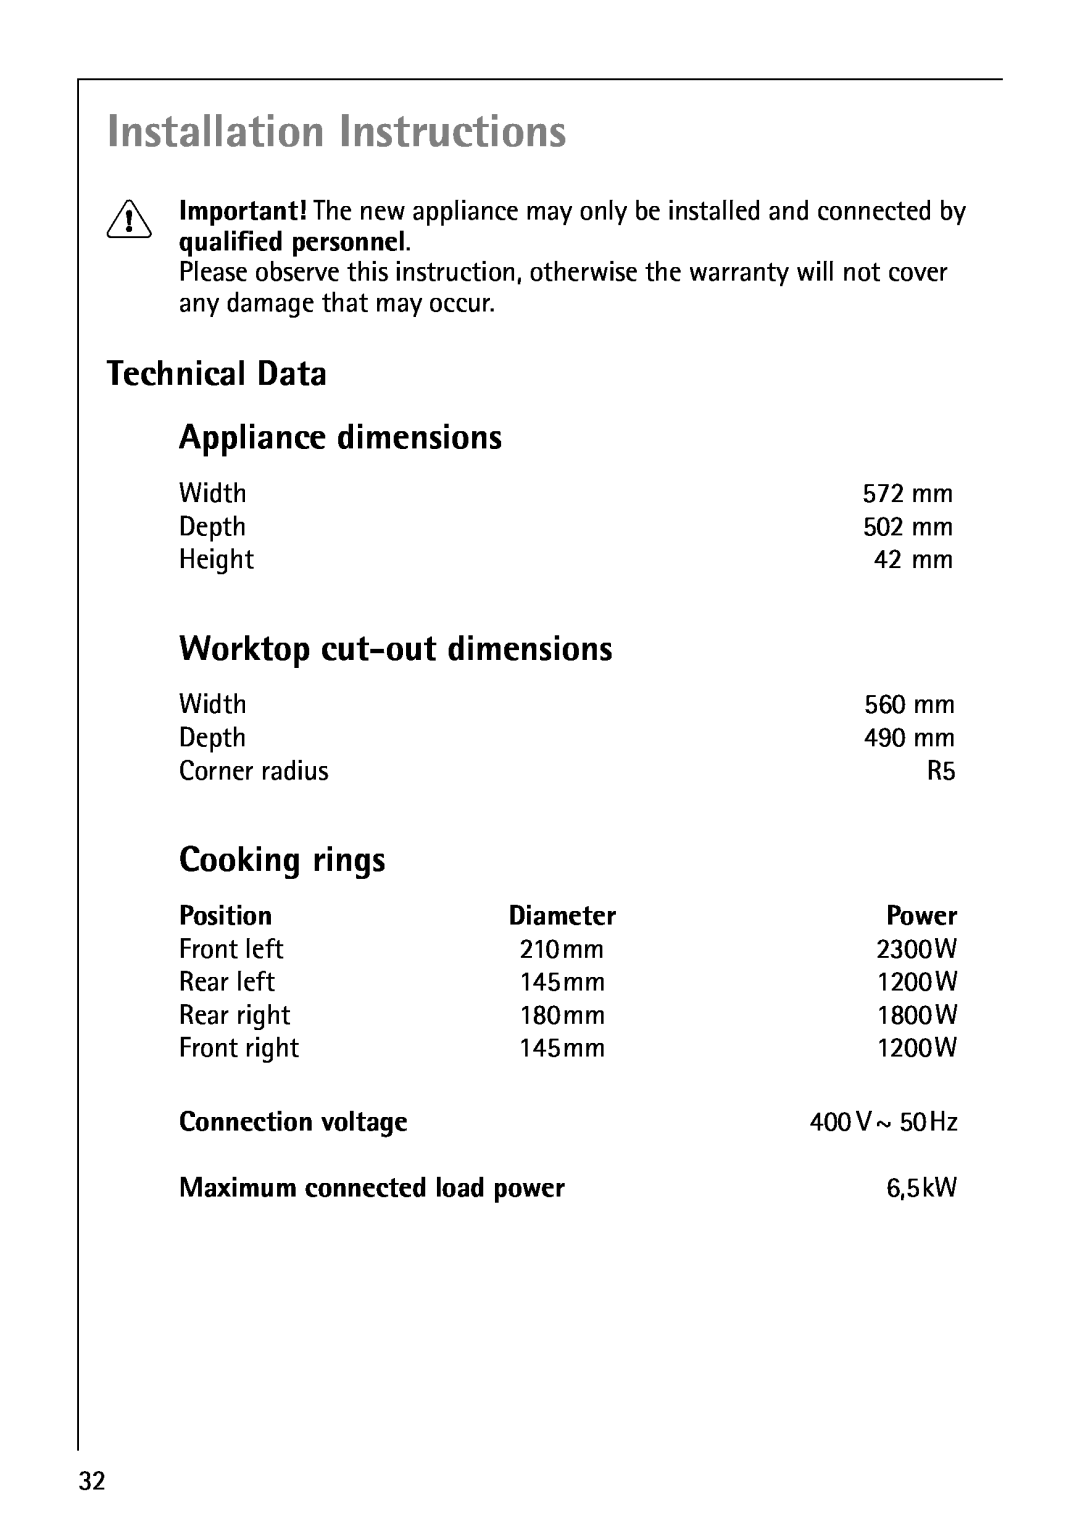 AEG 61000M Installation Instructions, Technical Data Appliance dimensions, Worktop cut-outdimensions, Cooking rings, Power 